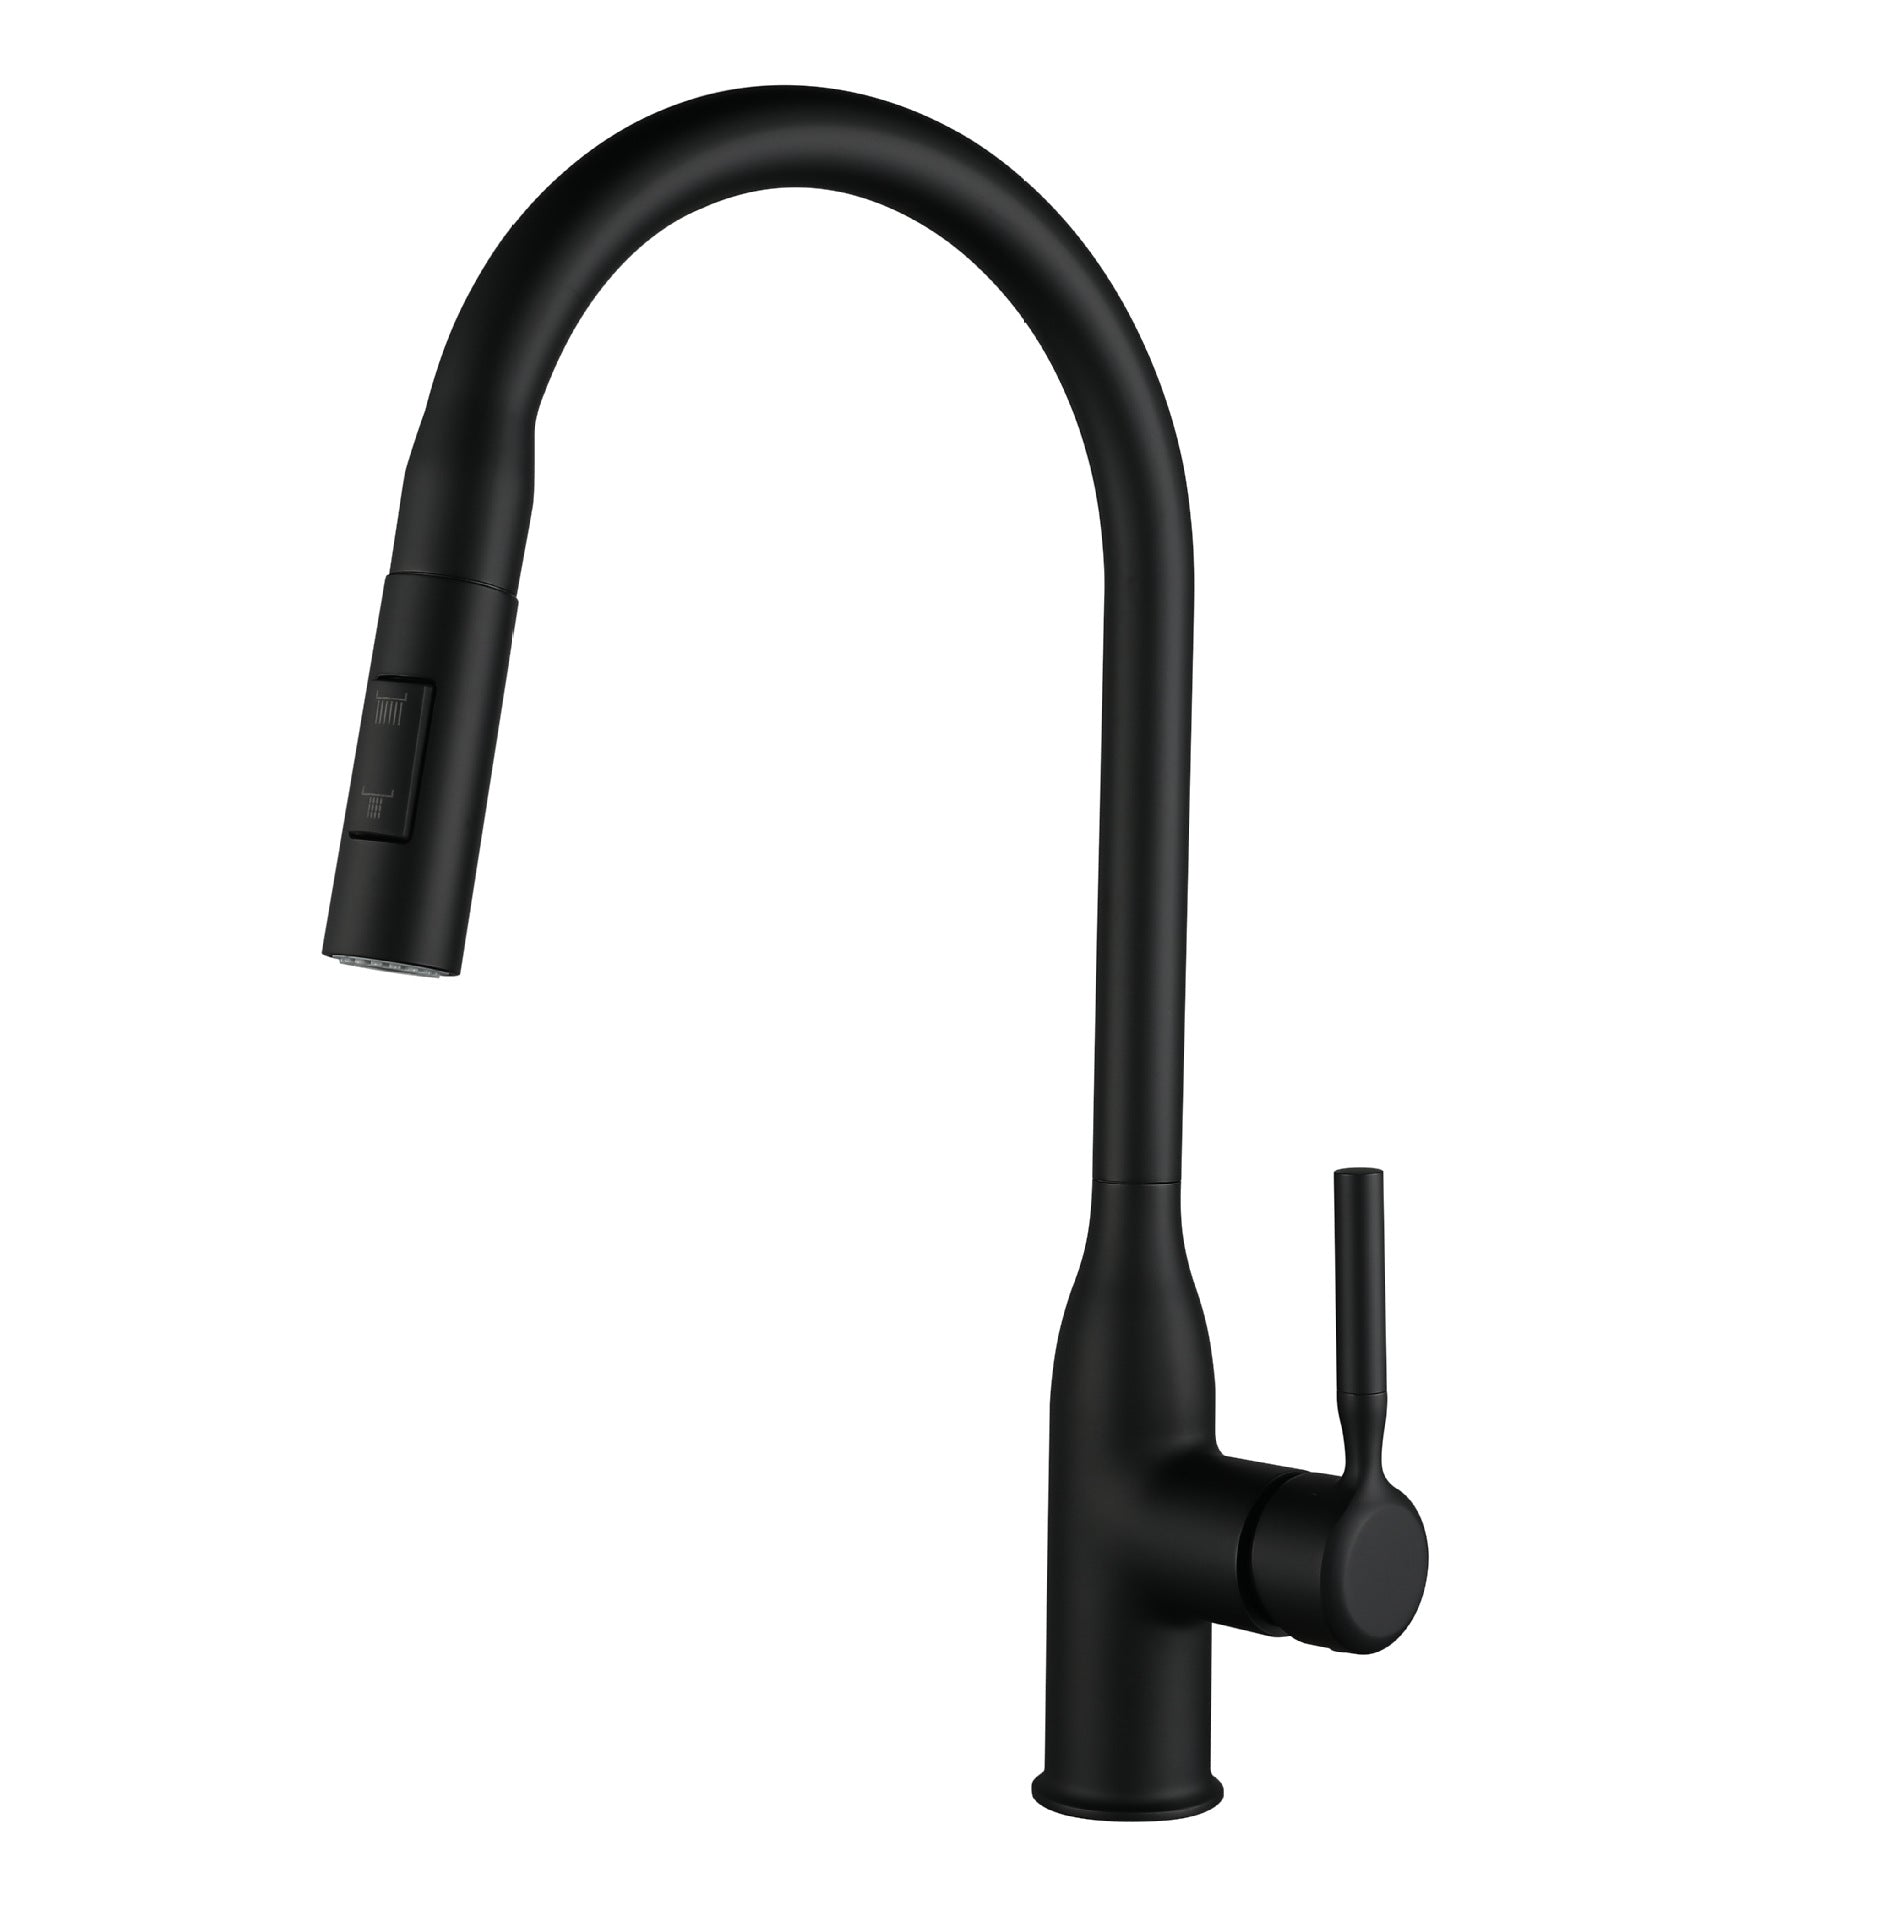 Hot and Cold Water Pull Down Sprayer Kitchen Faucet